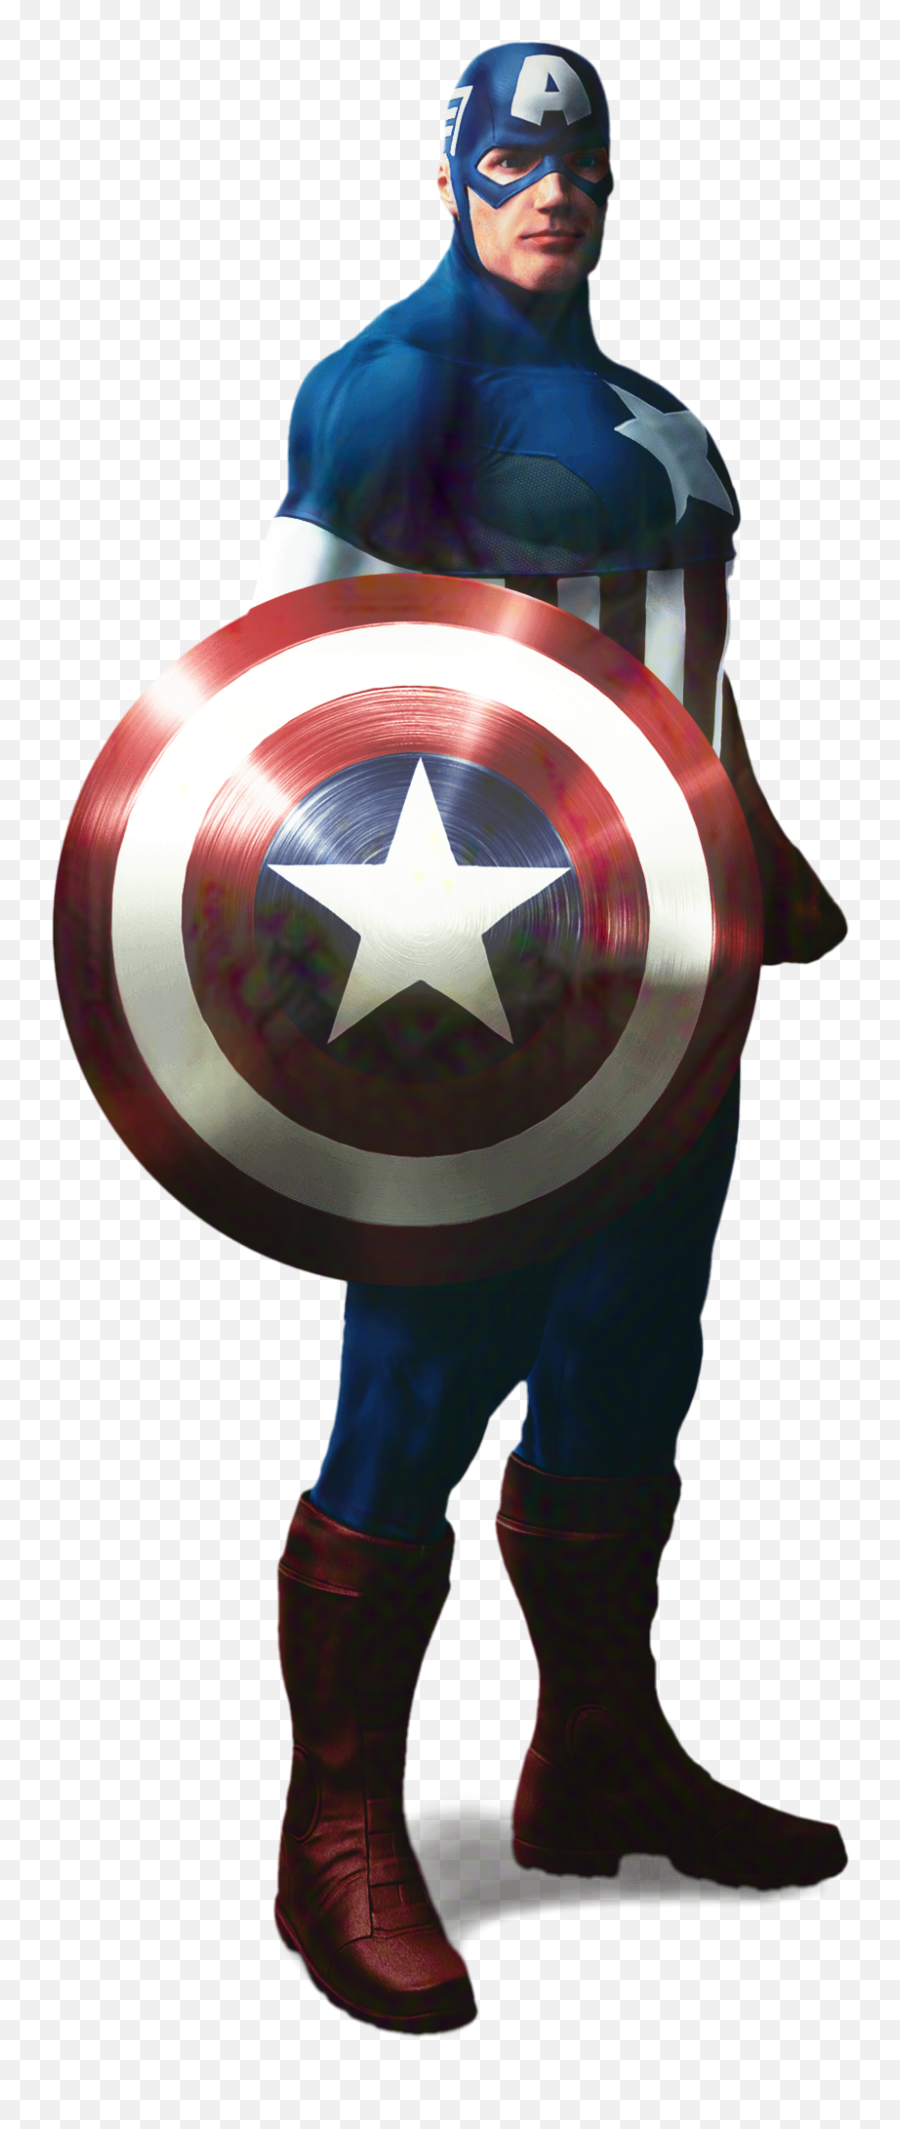 Captain America The First Avenger - Png Download 1184 Avengers Transparent Png Download Captain America,The Avengers Png